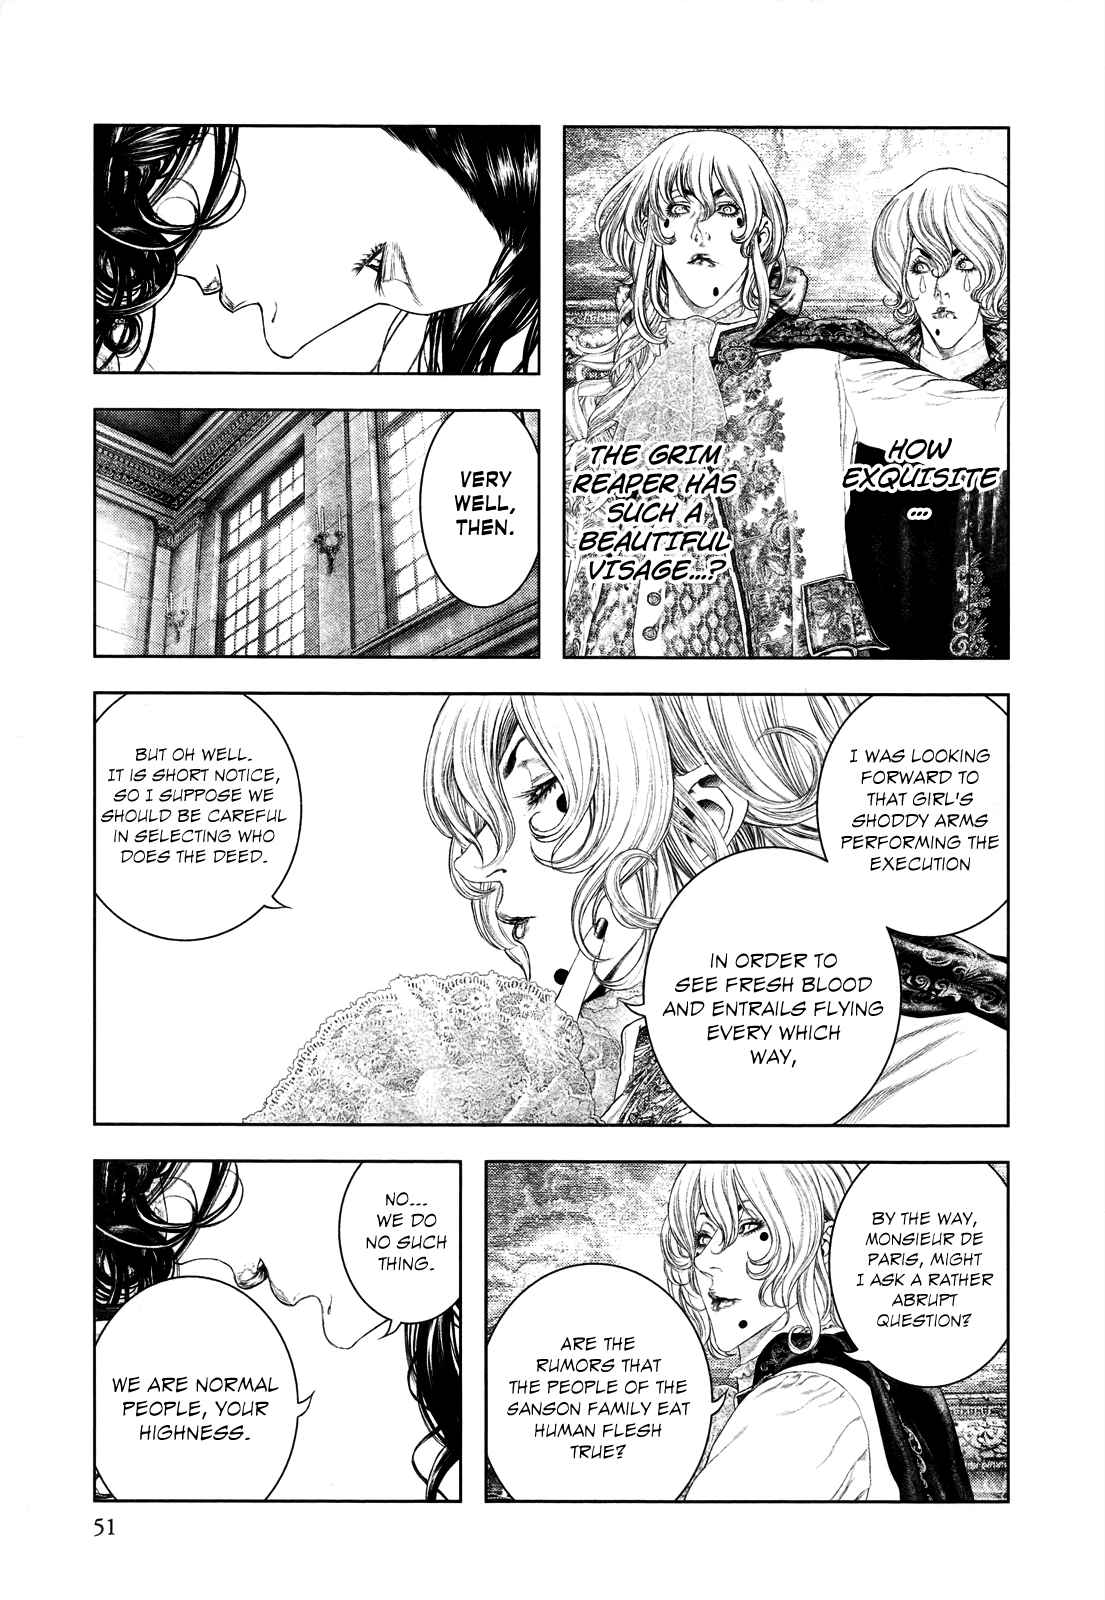 Innocent Vol. 6 Ch. 56 Maybe Me? "Ideals and Freedom"